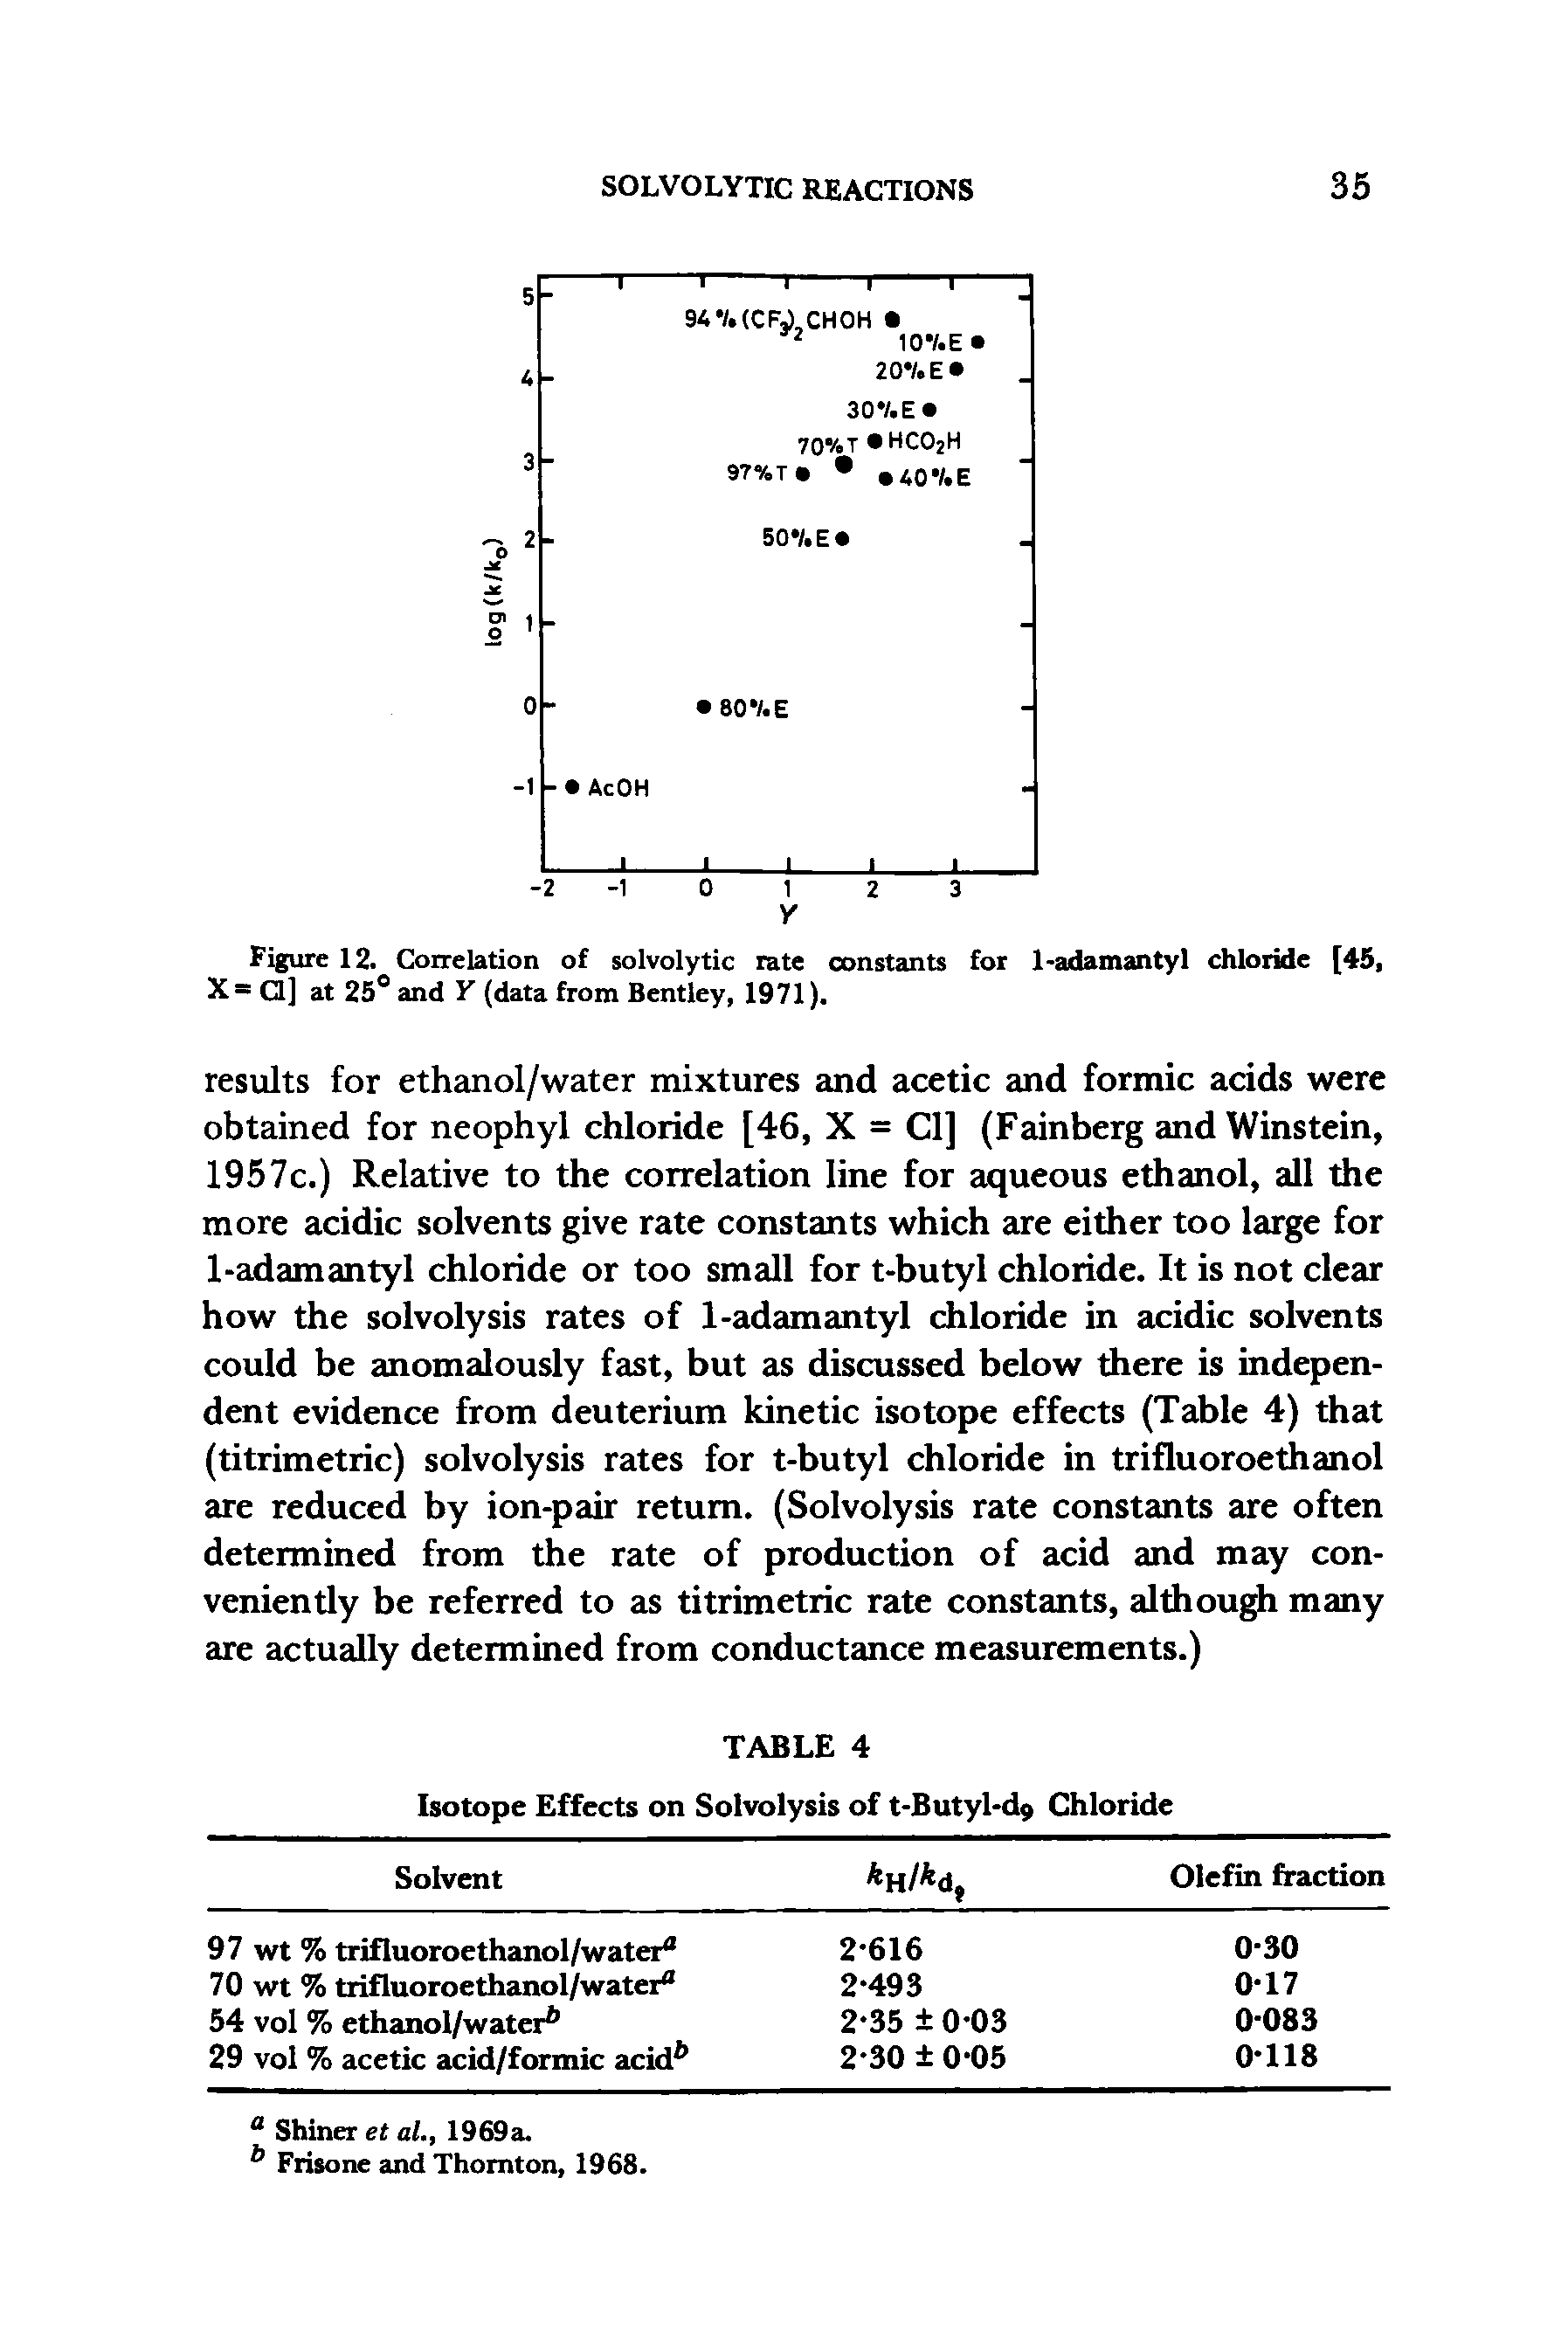 Figure 12. Correlation of solvolytic rate constants for 1-adamantyl chloride [45, X= Q] at 25° and Y (data from Bentley, 1971).